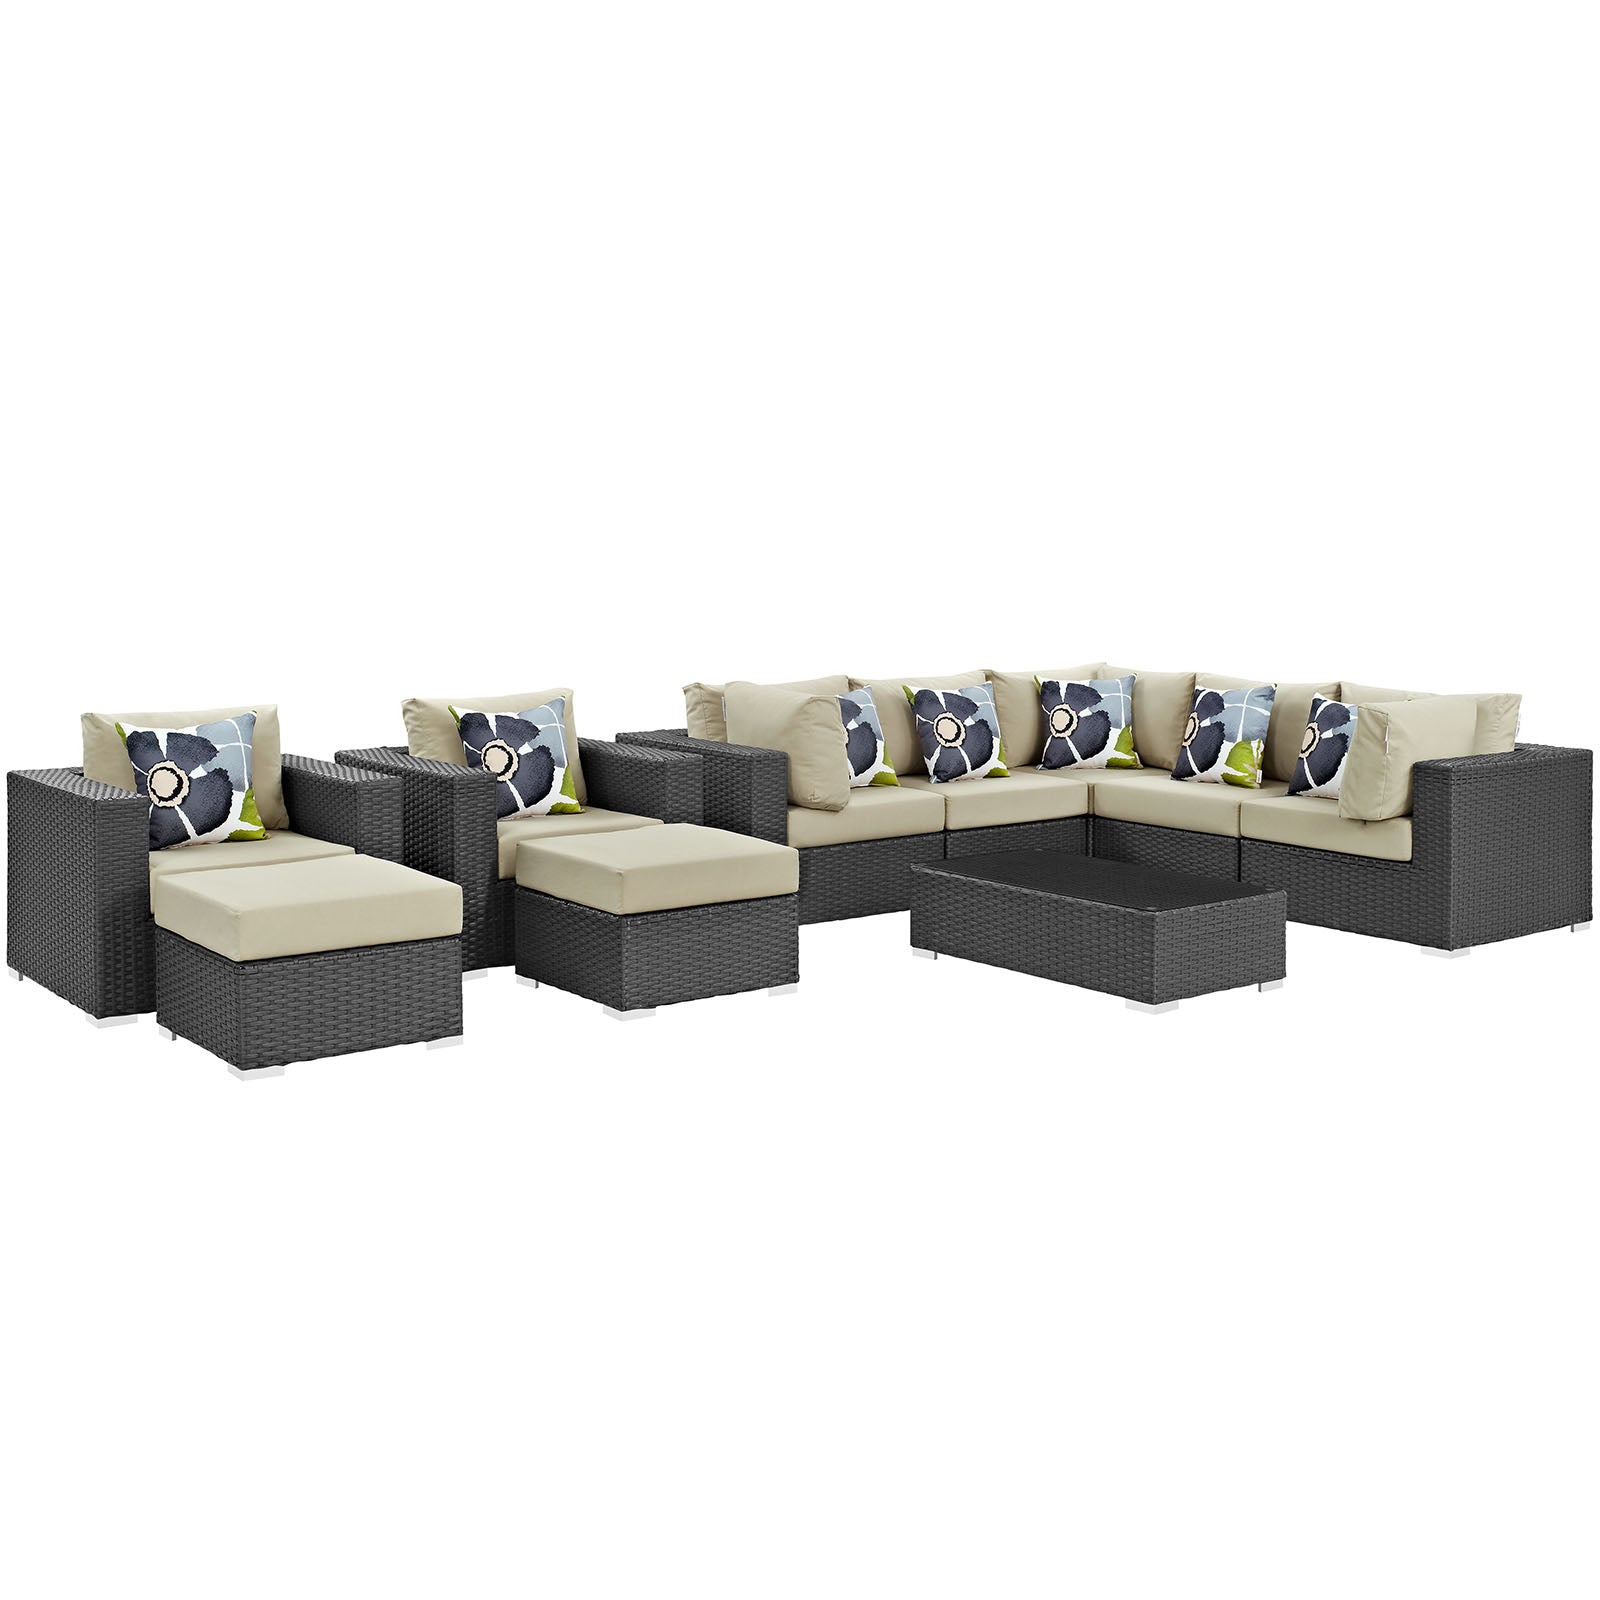 Sojourn 10 Piece Outdoor Patio Sunbrella® Sectional Set - East Shore Modern Home Furnishings